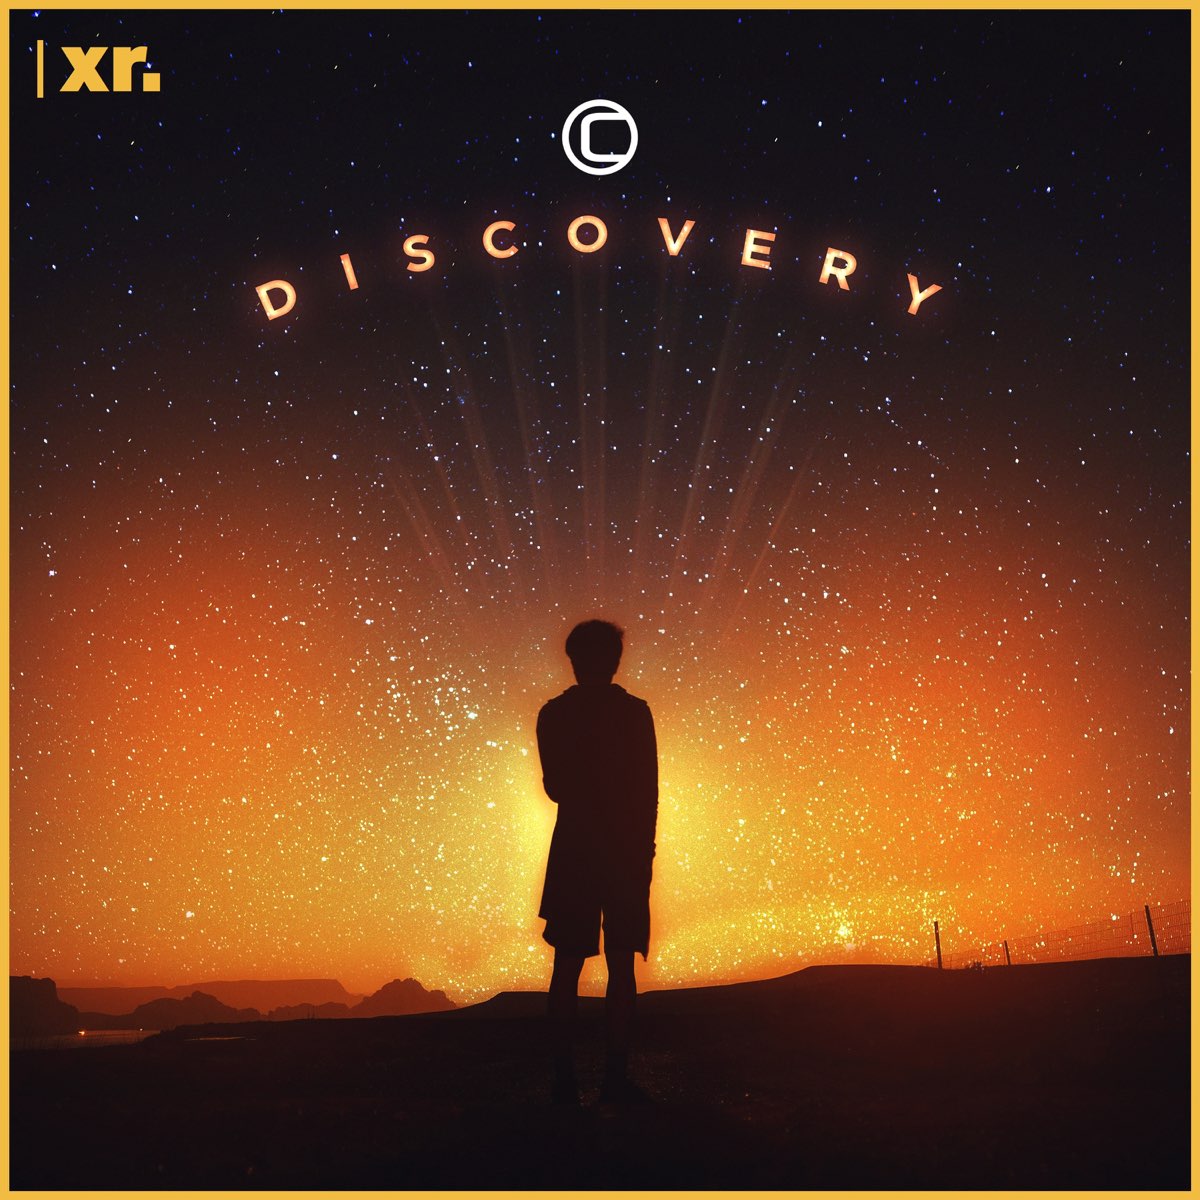 Discovery альбом. Альбом Дискавери. Discovery (Original Mix) afterthat.